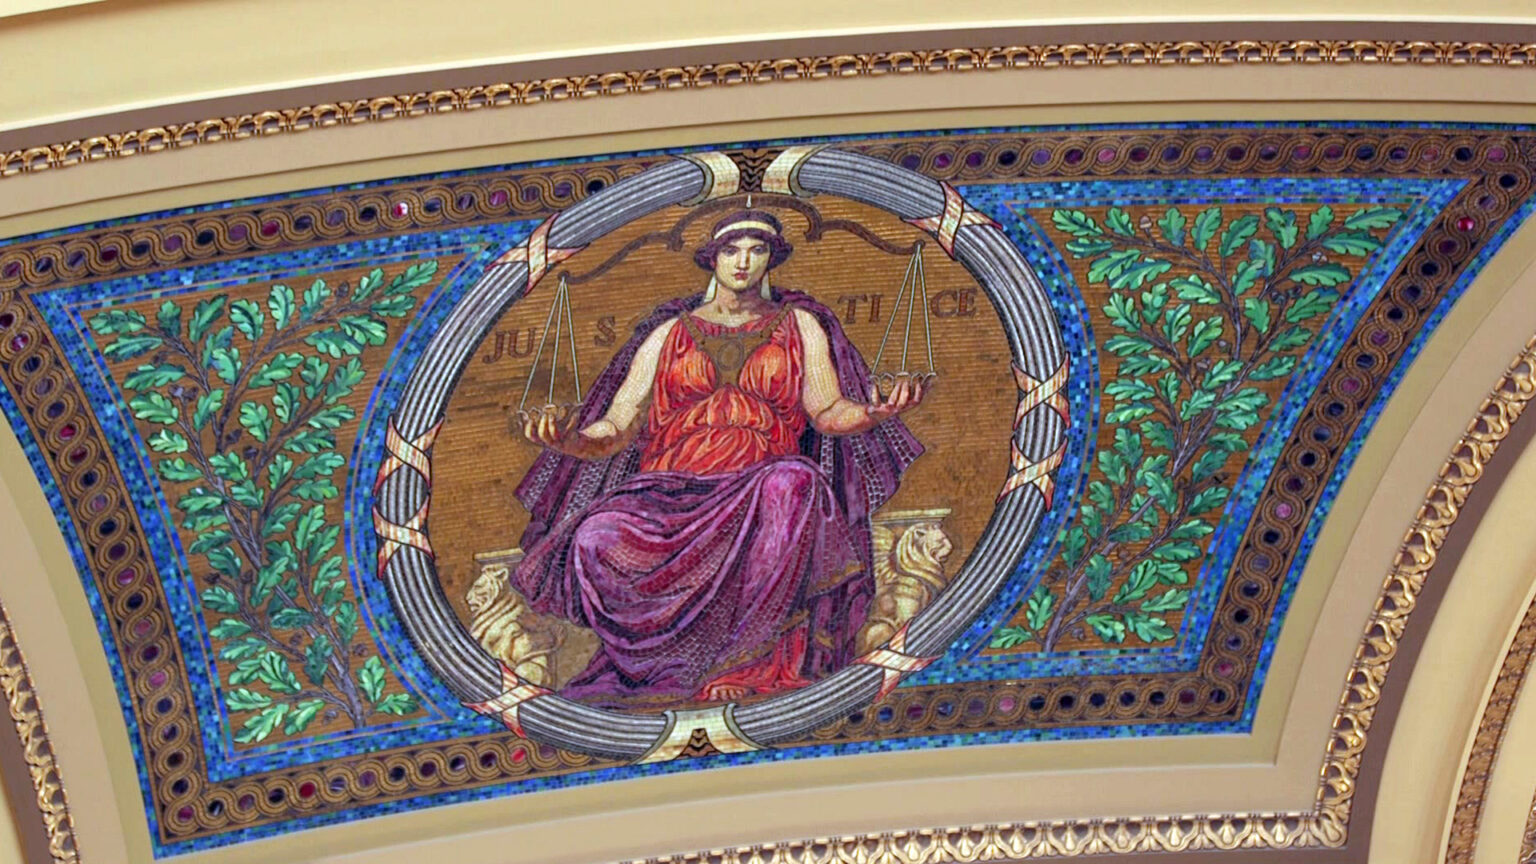 A mosaic depicting a Classical figure holding a scale and labeled Justice is seen on a curved interior wall of a rotunda inside a building.